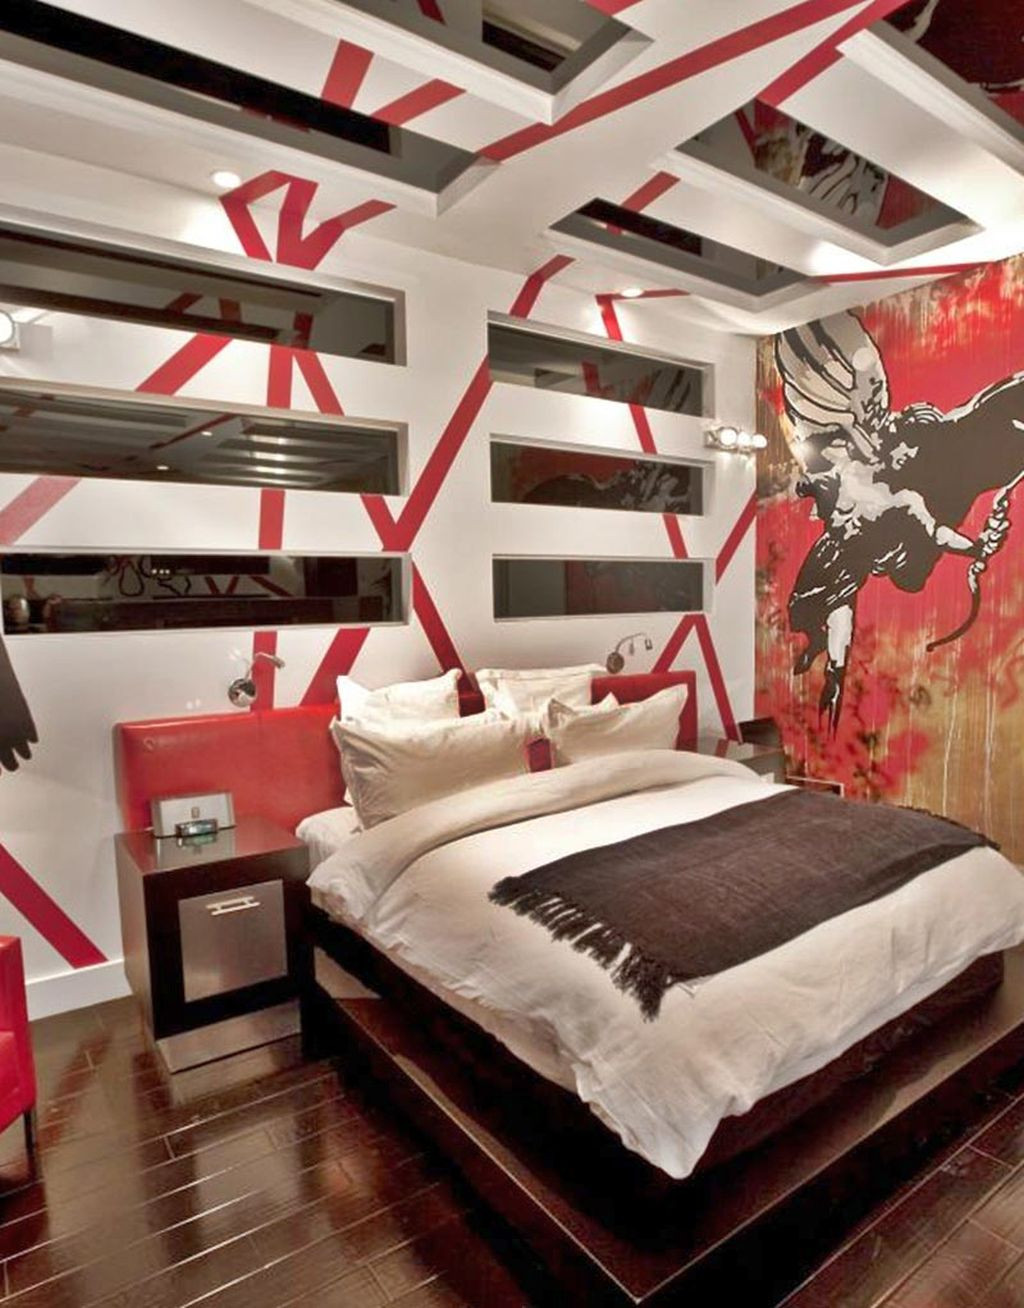 Cool Paint Ideas for Bedroom Beautiful 19 Cool Painting Ideas for Bedrooms You Ll Love for Sure